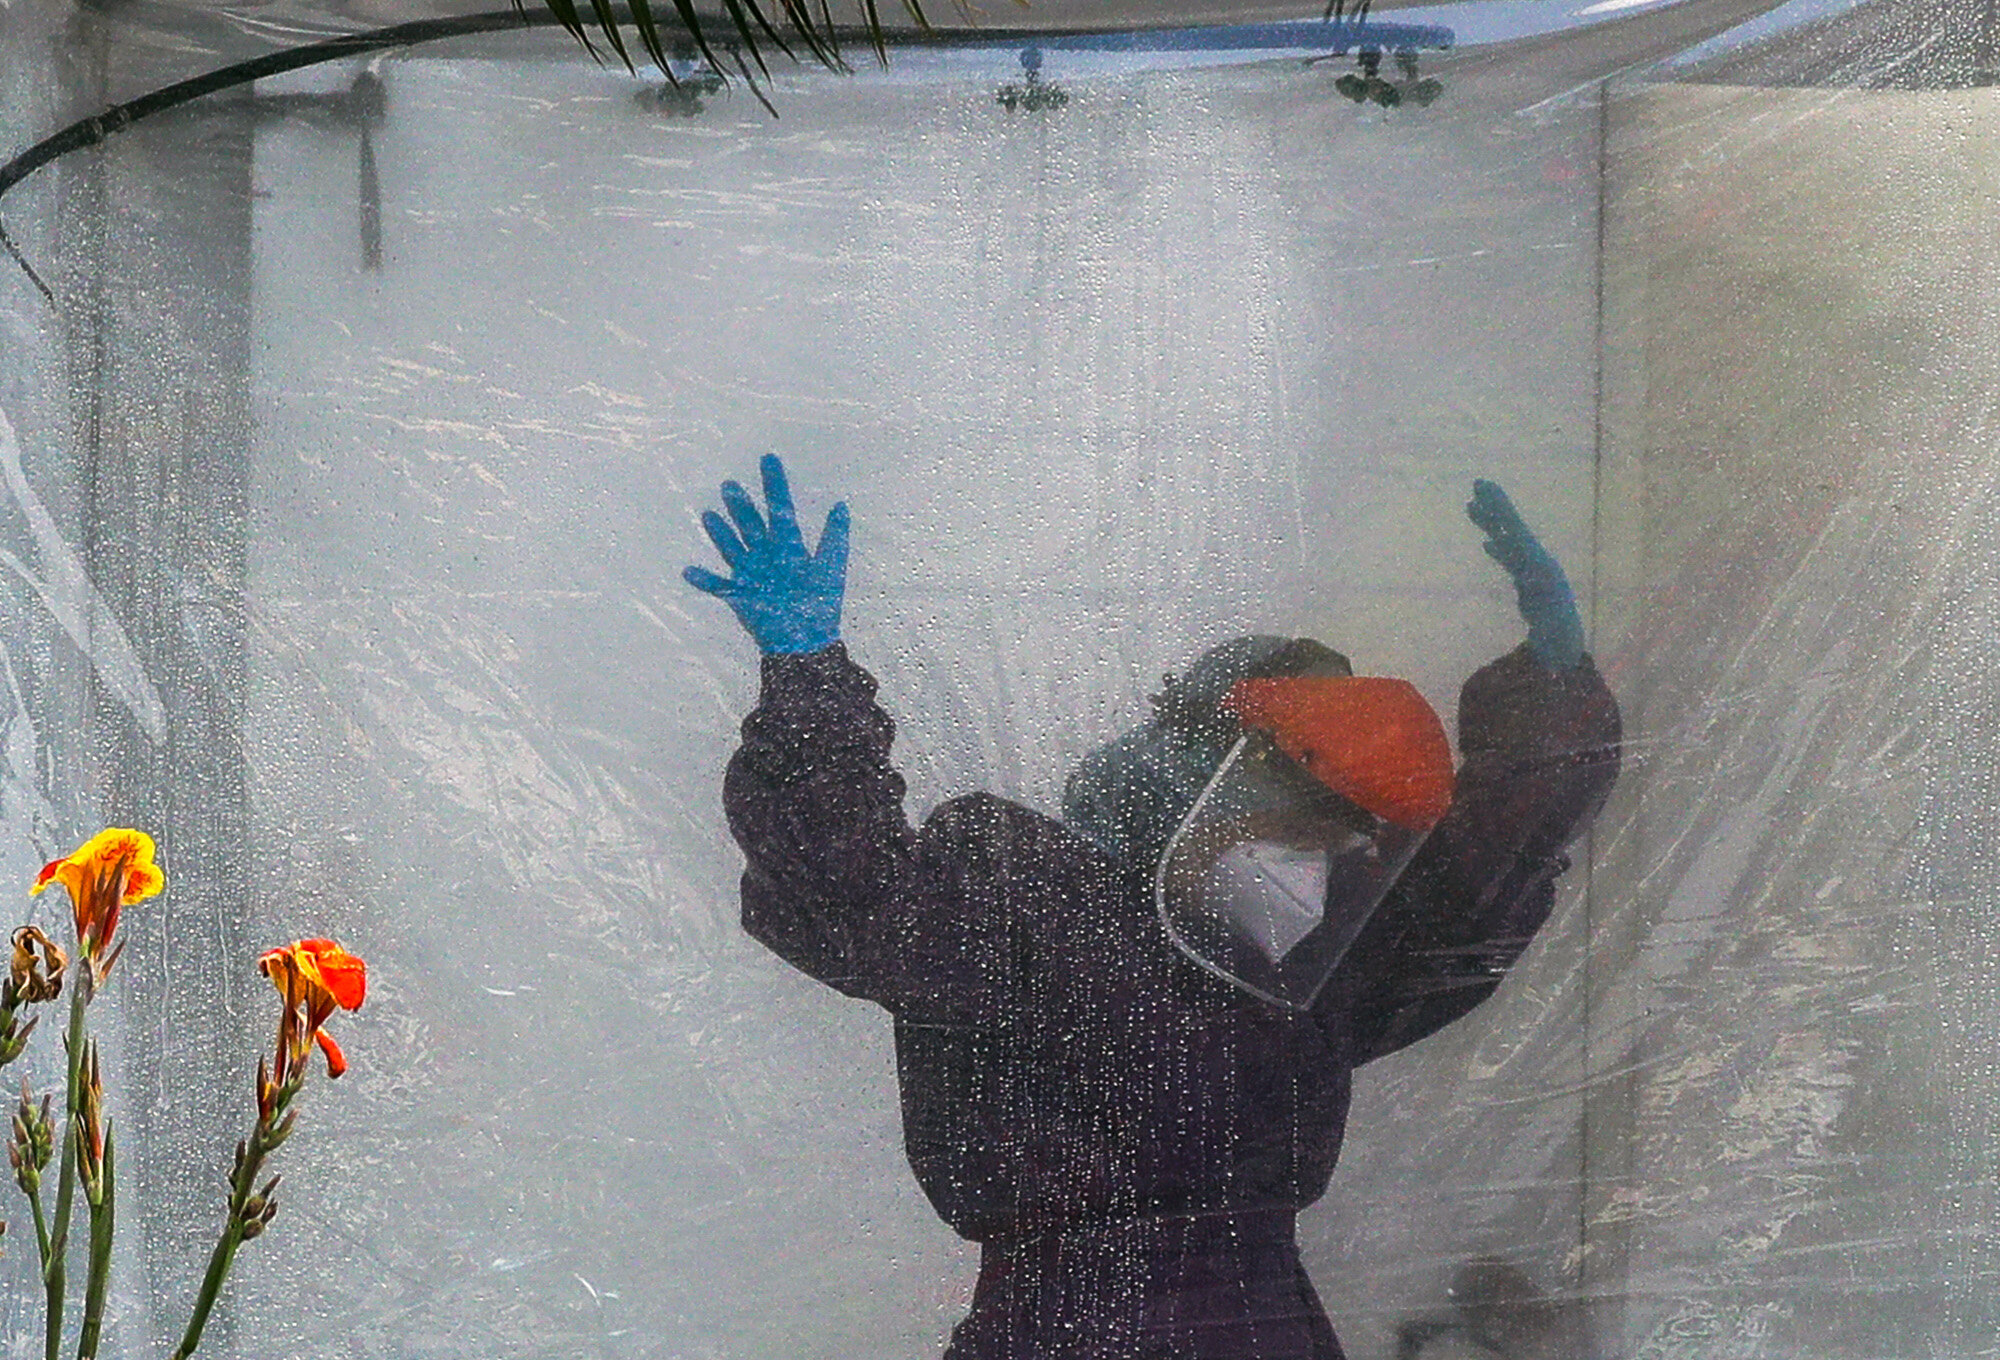  A health worker wearing a protective suit is disinfected in a portable tent outside the Gat Andres Bonifacio Memorial Medical Center in Manila, Philippines, on April 27, 2020, during an enhanced community quarantine to prevent the spread of the coro